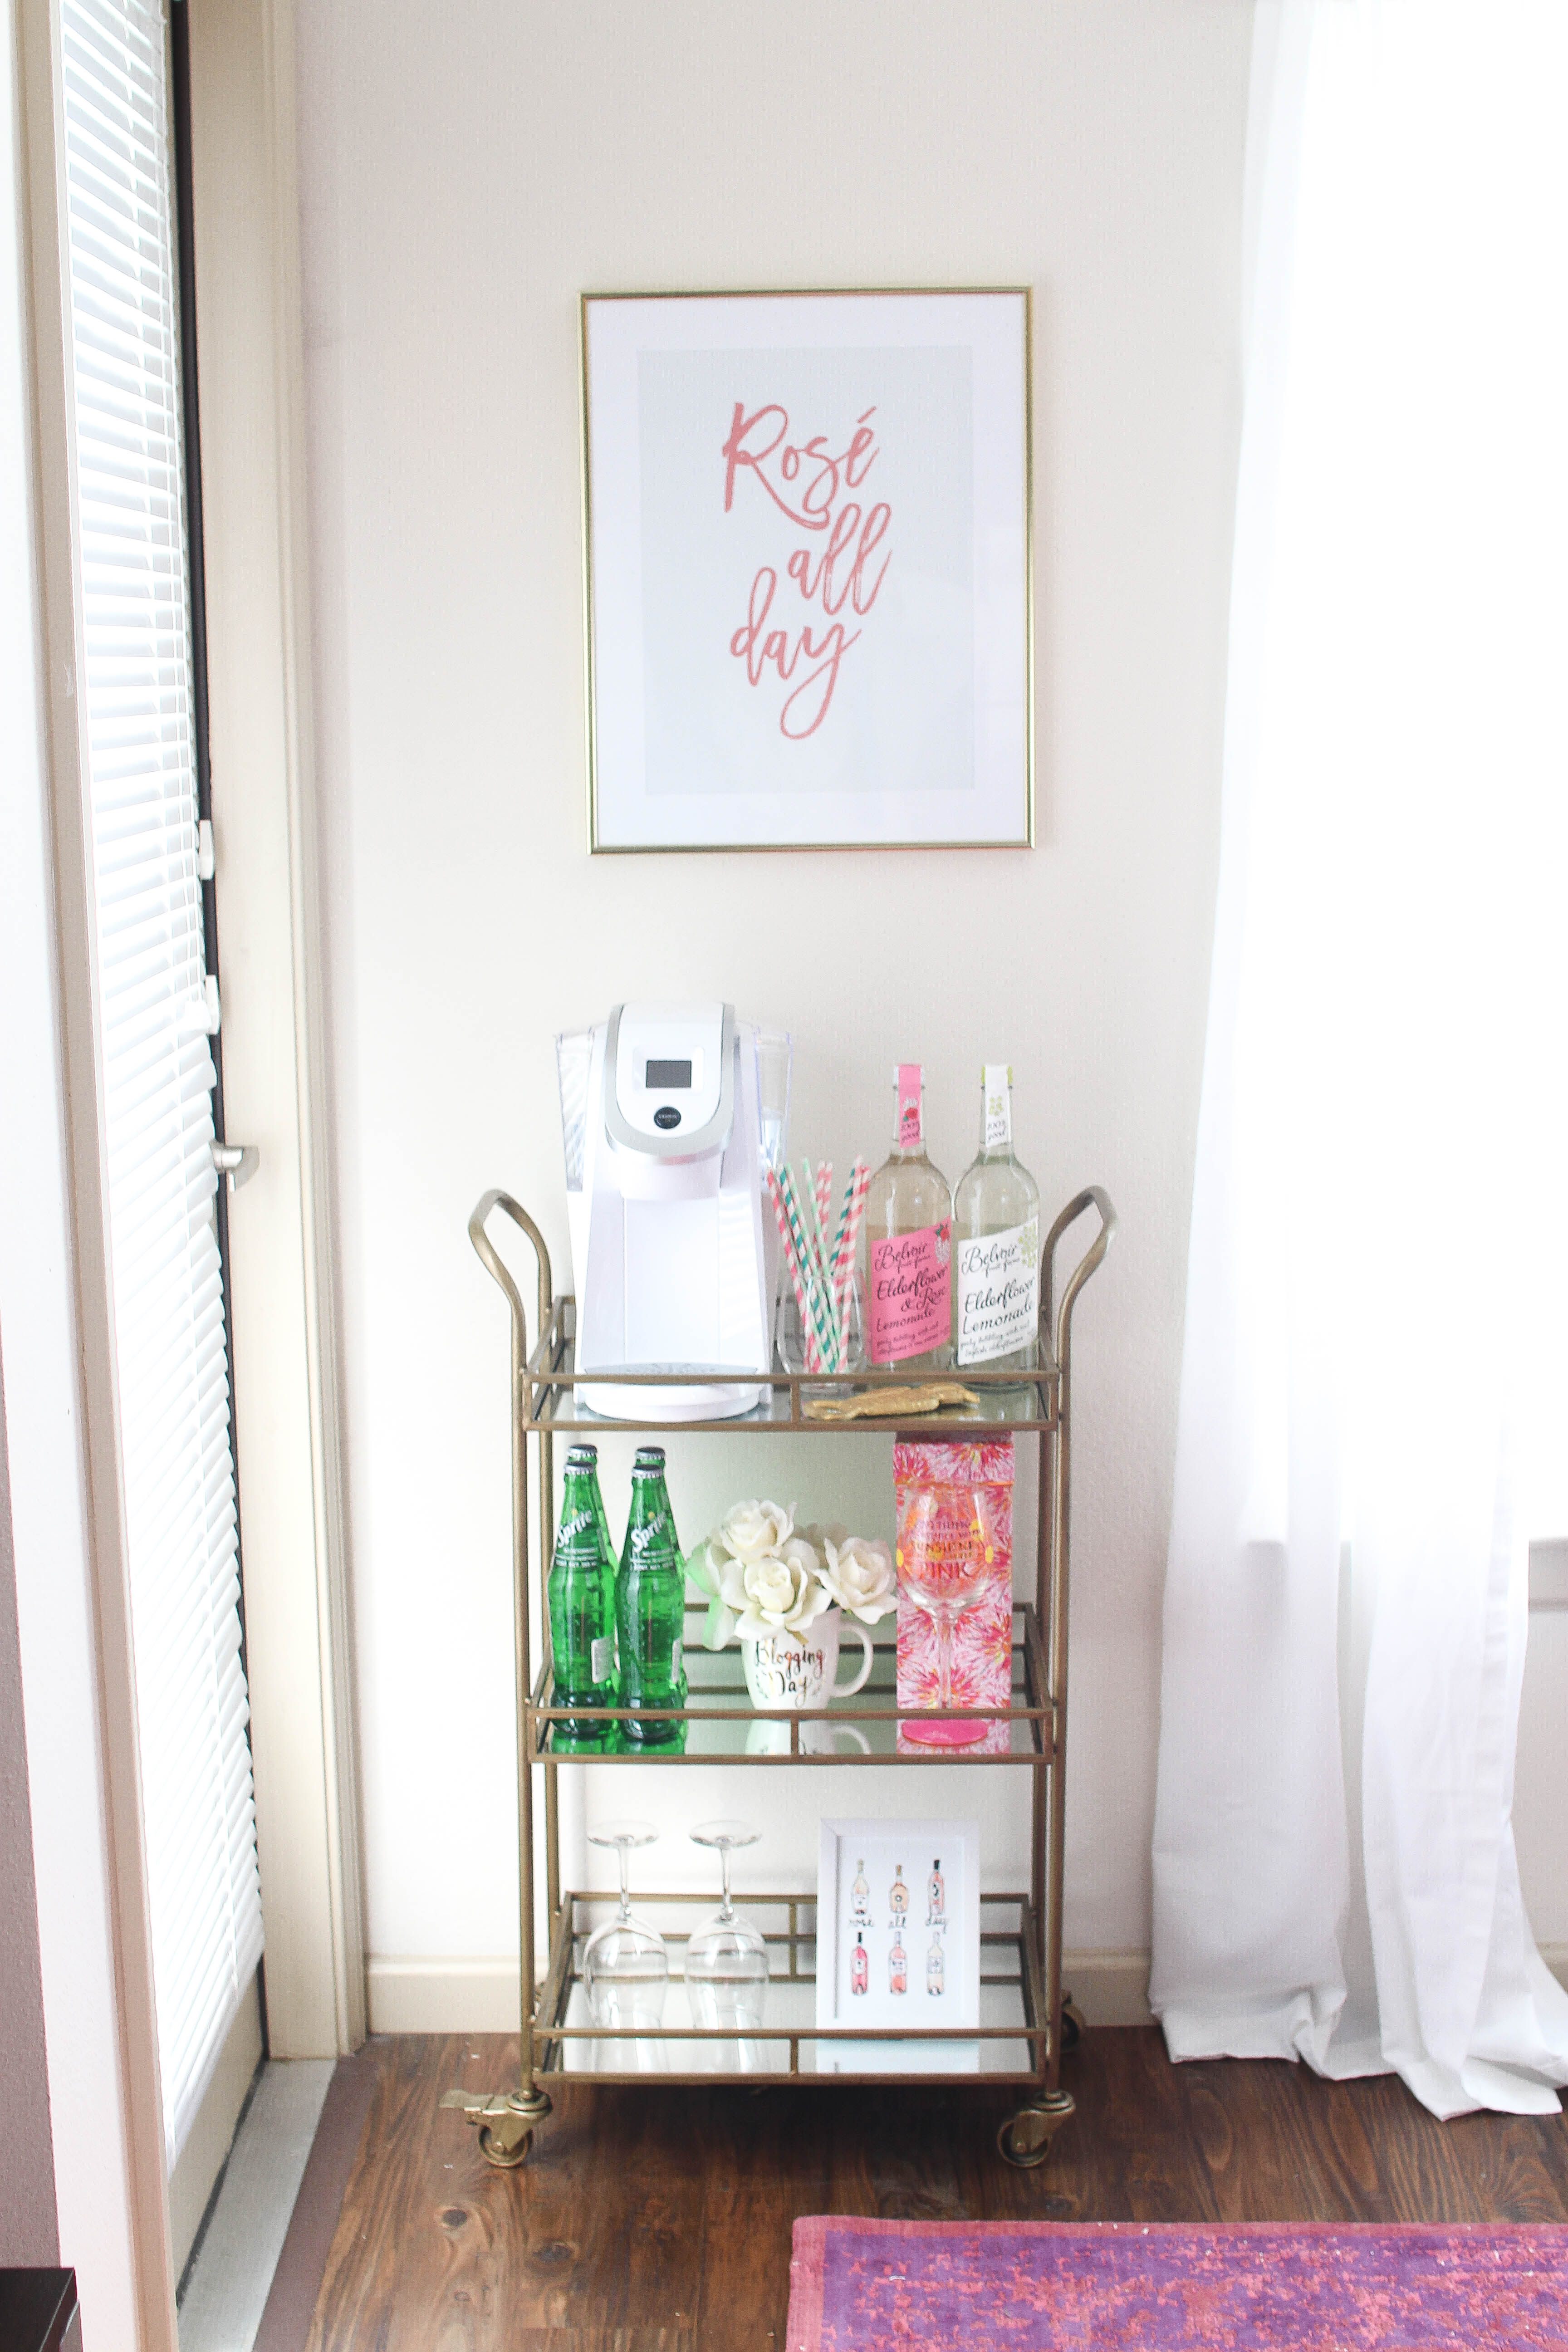 My Bar Cart + How I Easily Decorated it using photoshop! home decor by lauren lindmark on daily dose of charm